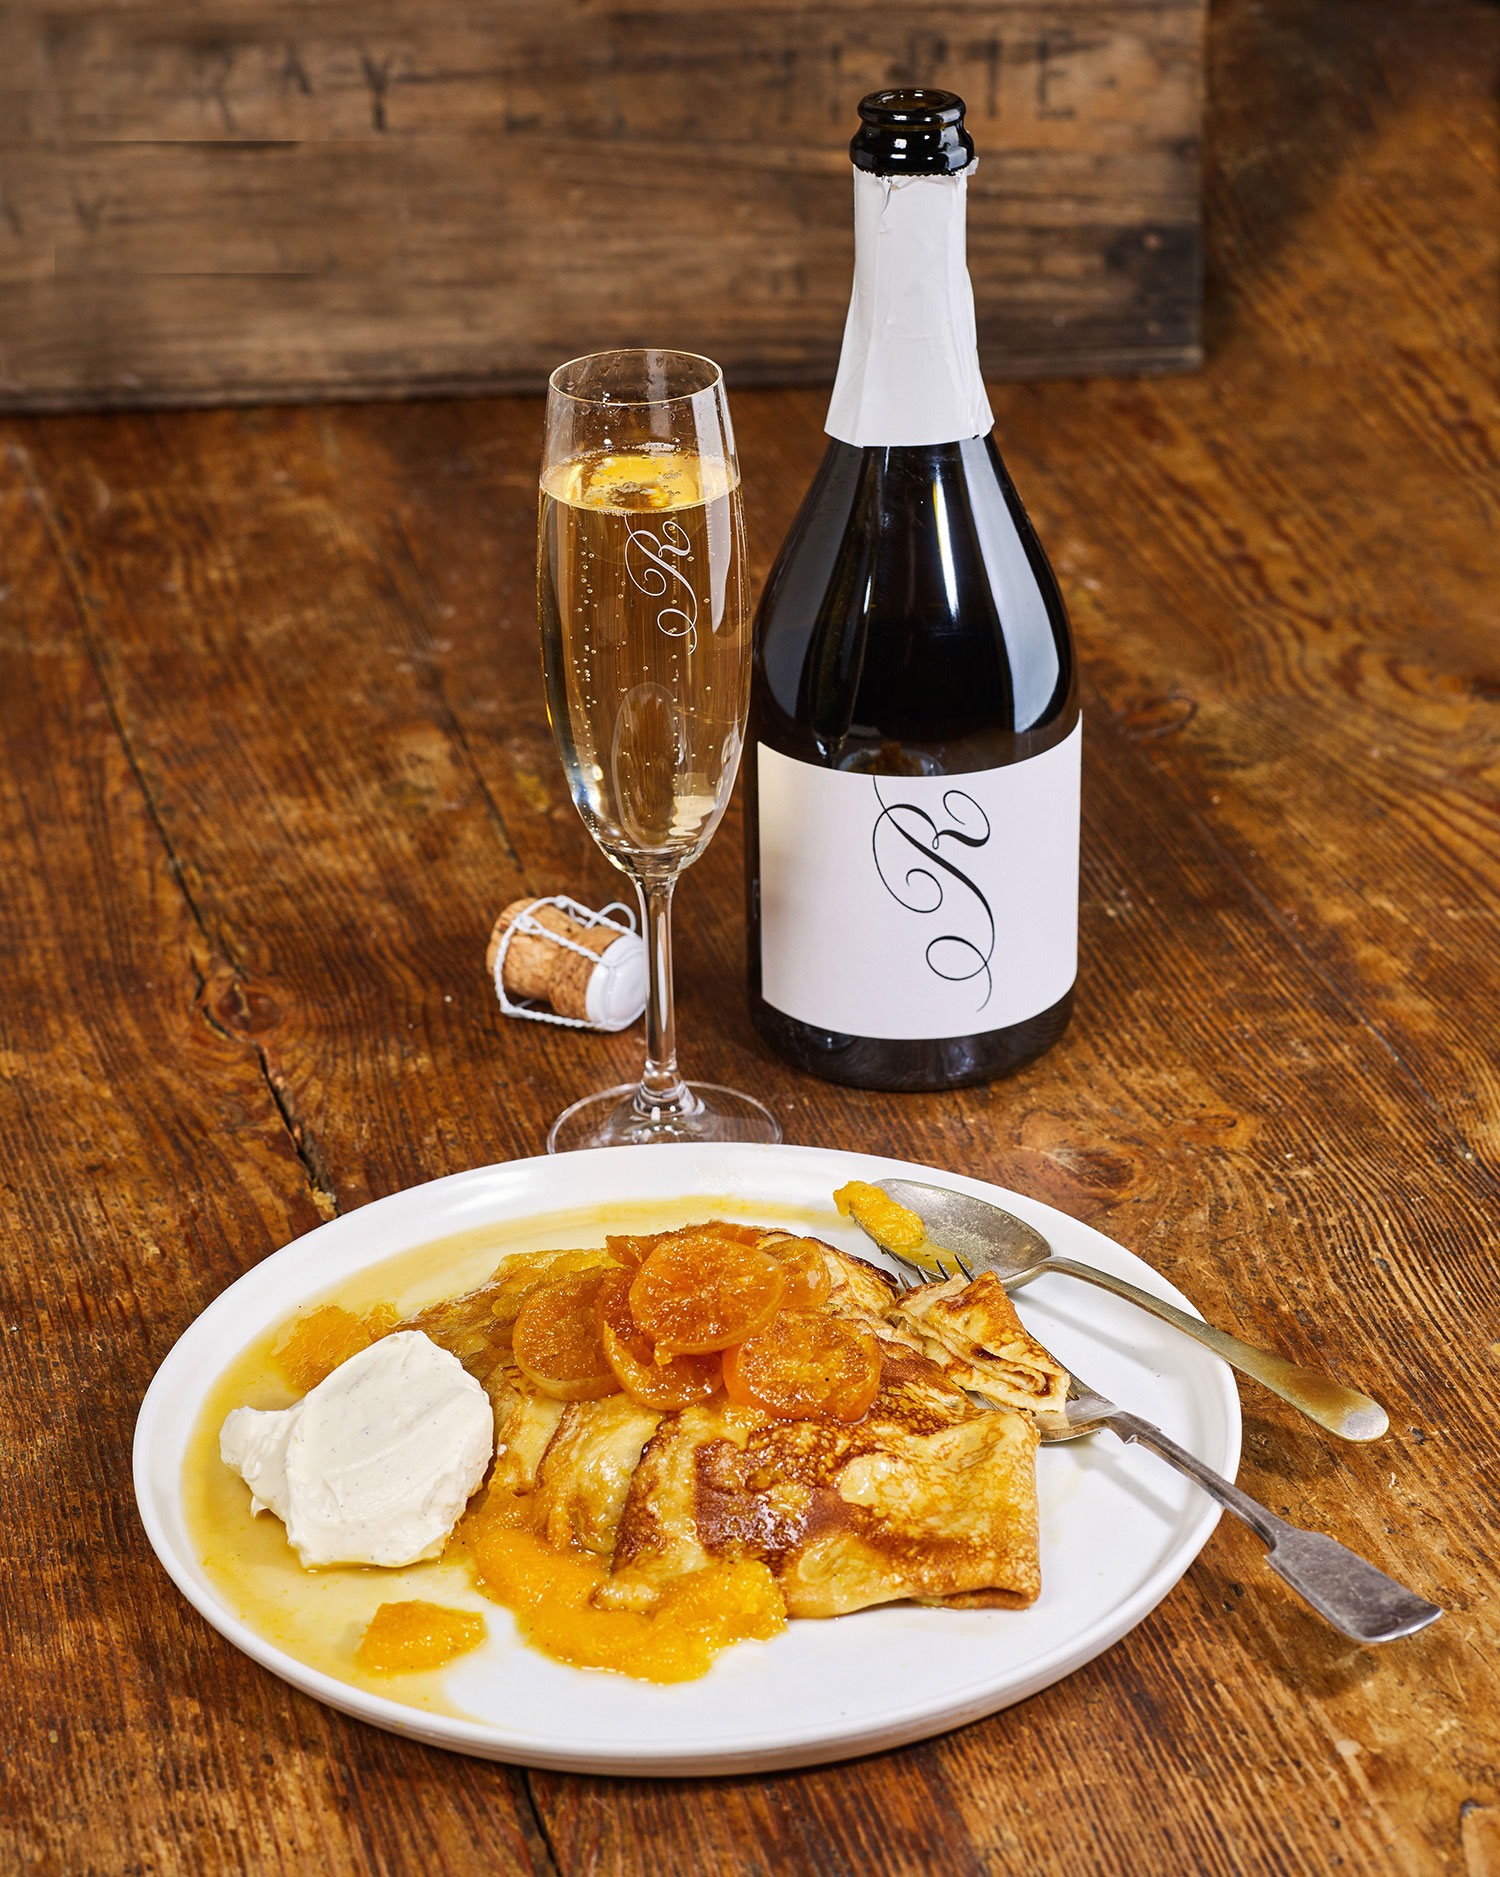 Crepes Suzette with Ros Ritchie 2013 Pinot Noir, Pinot Meunier Cuvée at cellar door